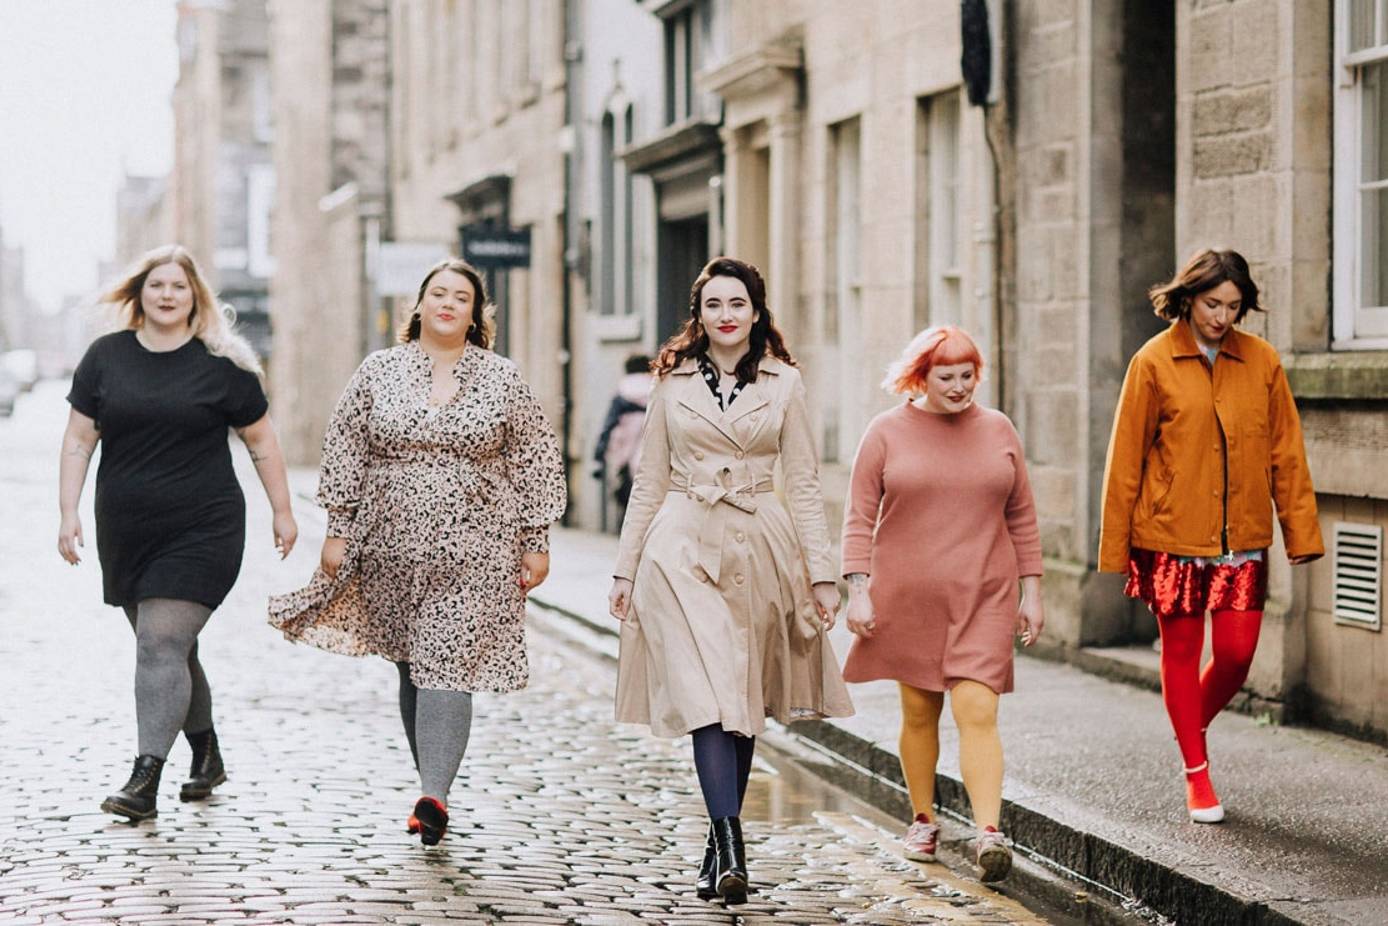 Over 75 percent of plus size women 'hate' shopping on high street